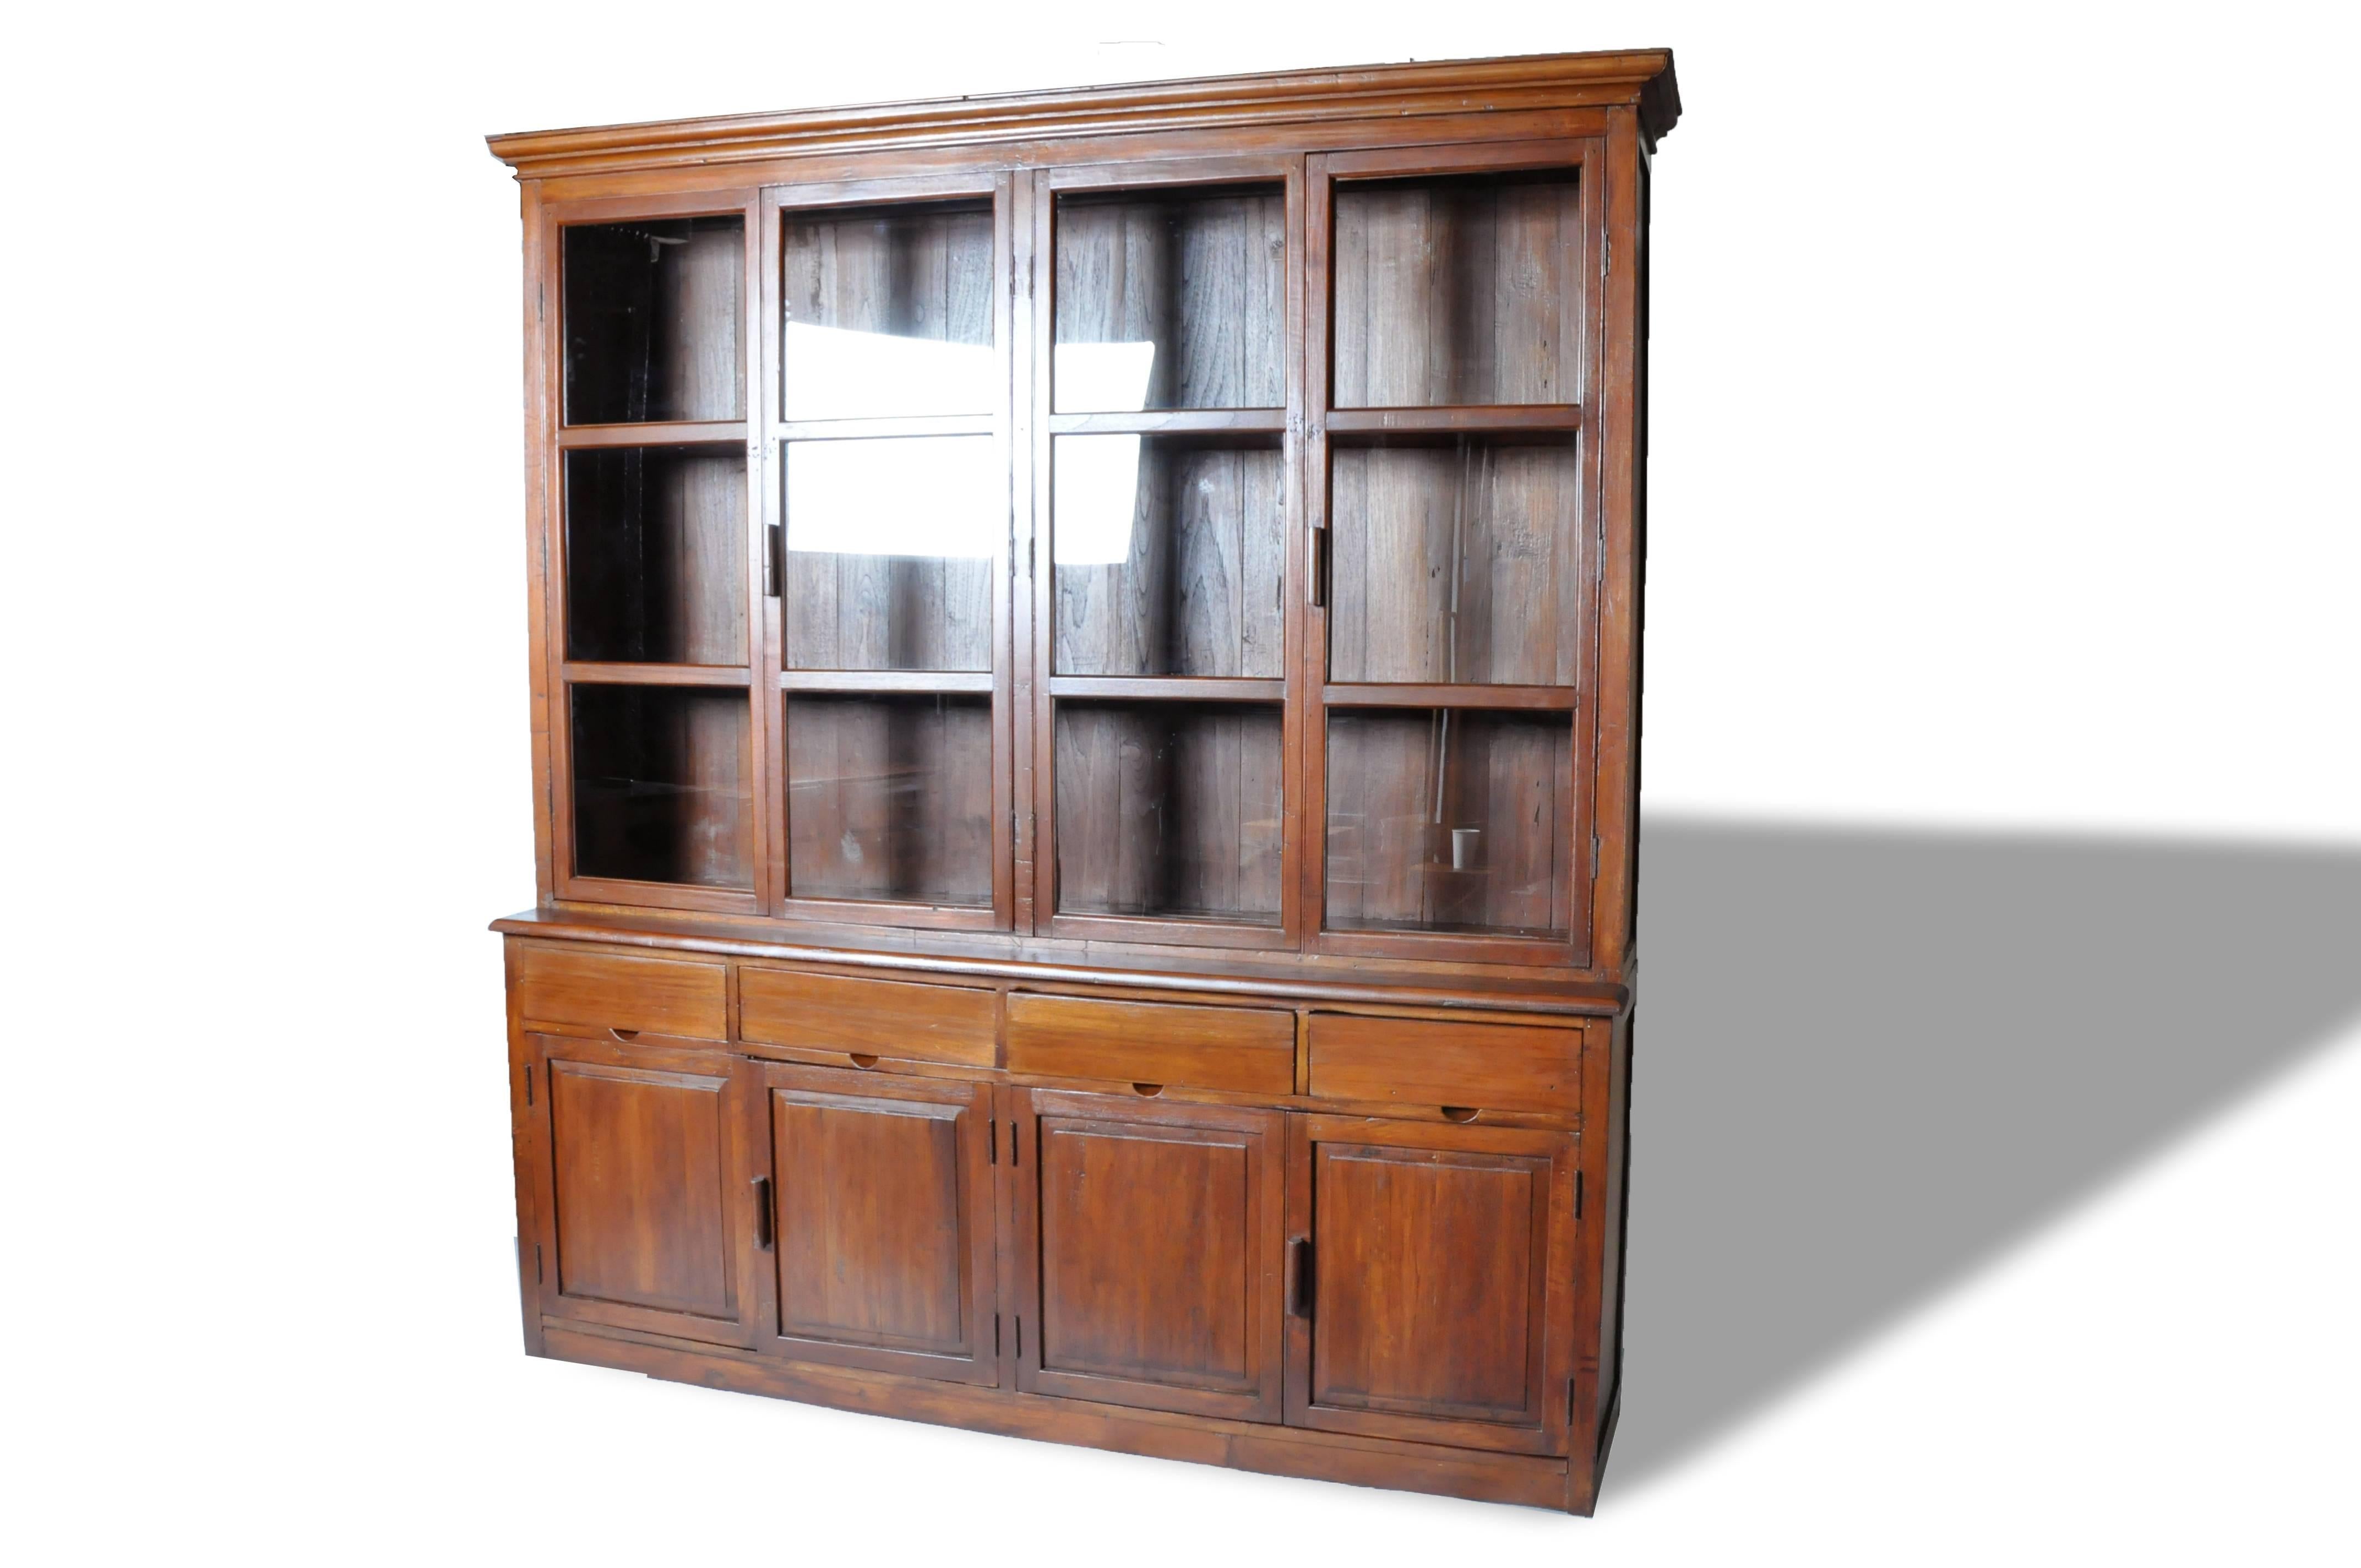 This impressive British Colonial cabinet comes in two parts; the top part features a display case that has two pairs of glass paned doors that open to compartments lined with shelves while the bottom section boasts ample storage space in the form of